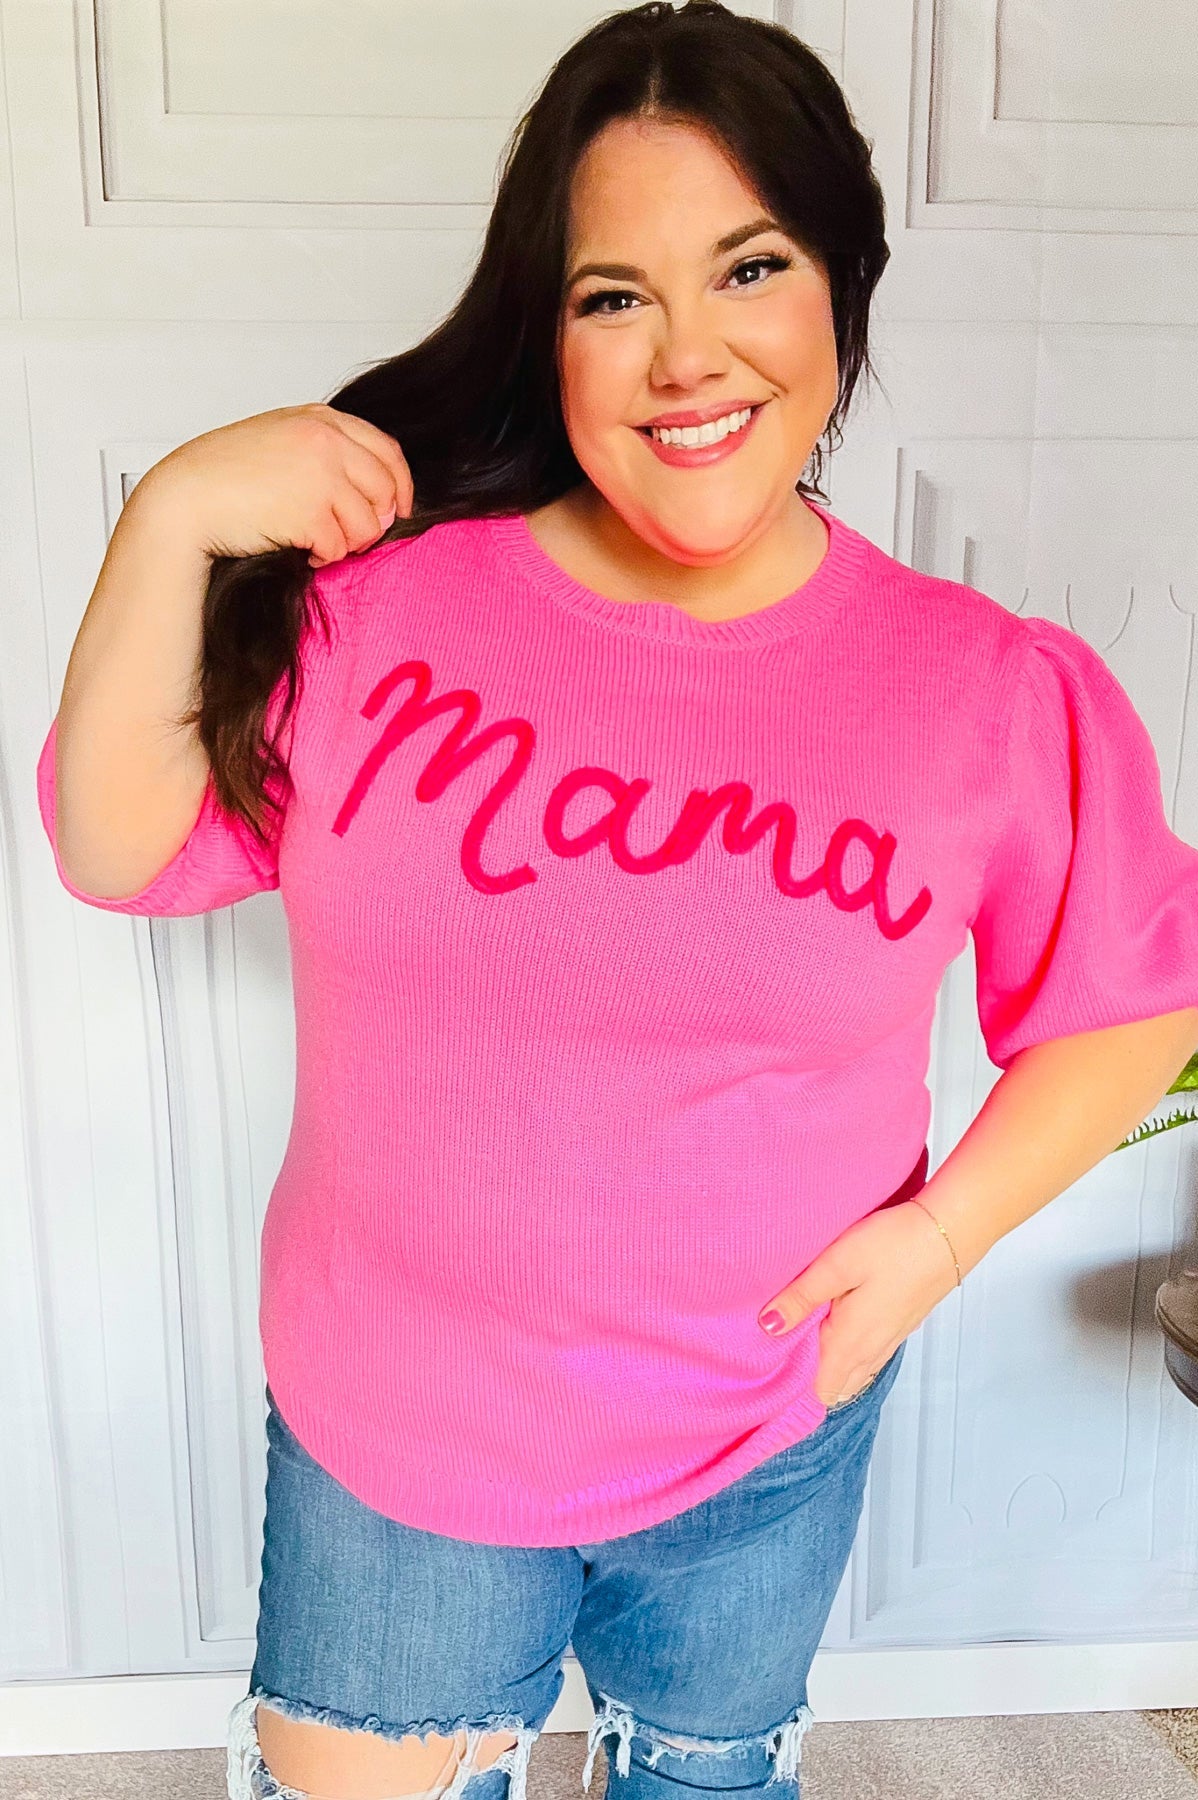 Take A Bow Pink "Mama" Embroidery Puff Sleeve Sweater Top Haptics